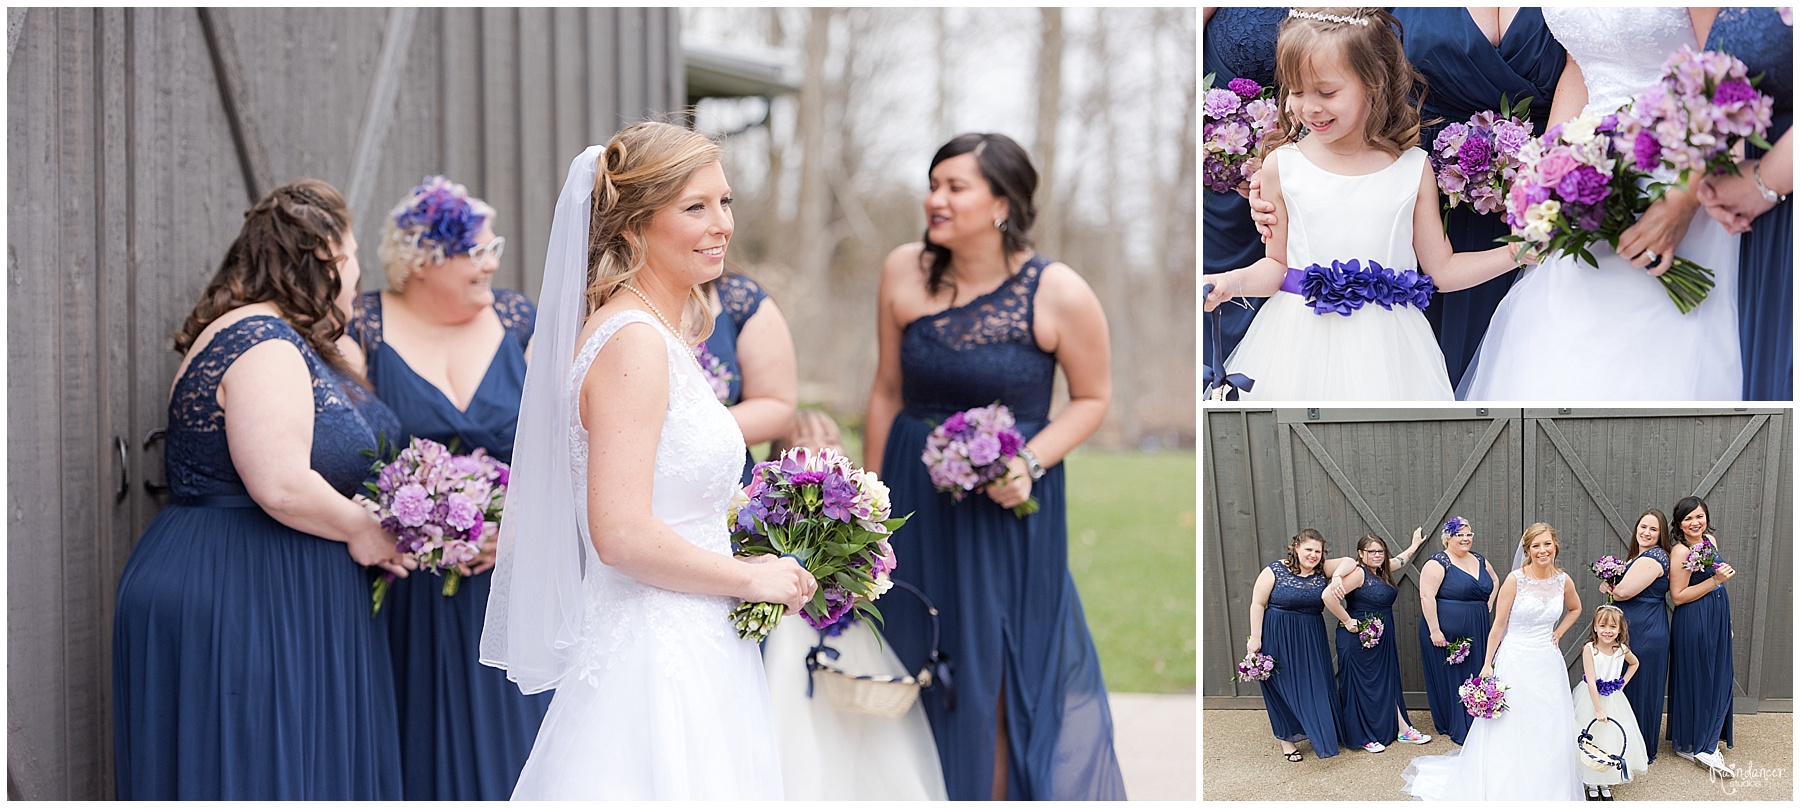 Bride with bridal party and flower girl by Raindancer Studios Indianapolis Wedding Photographer Jill Howell